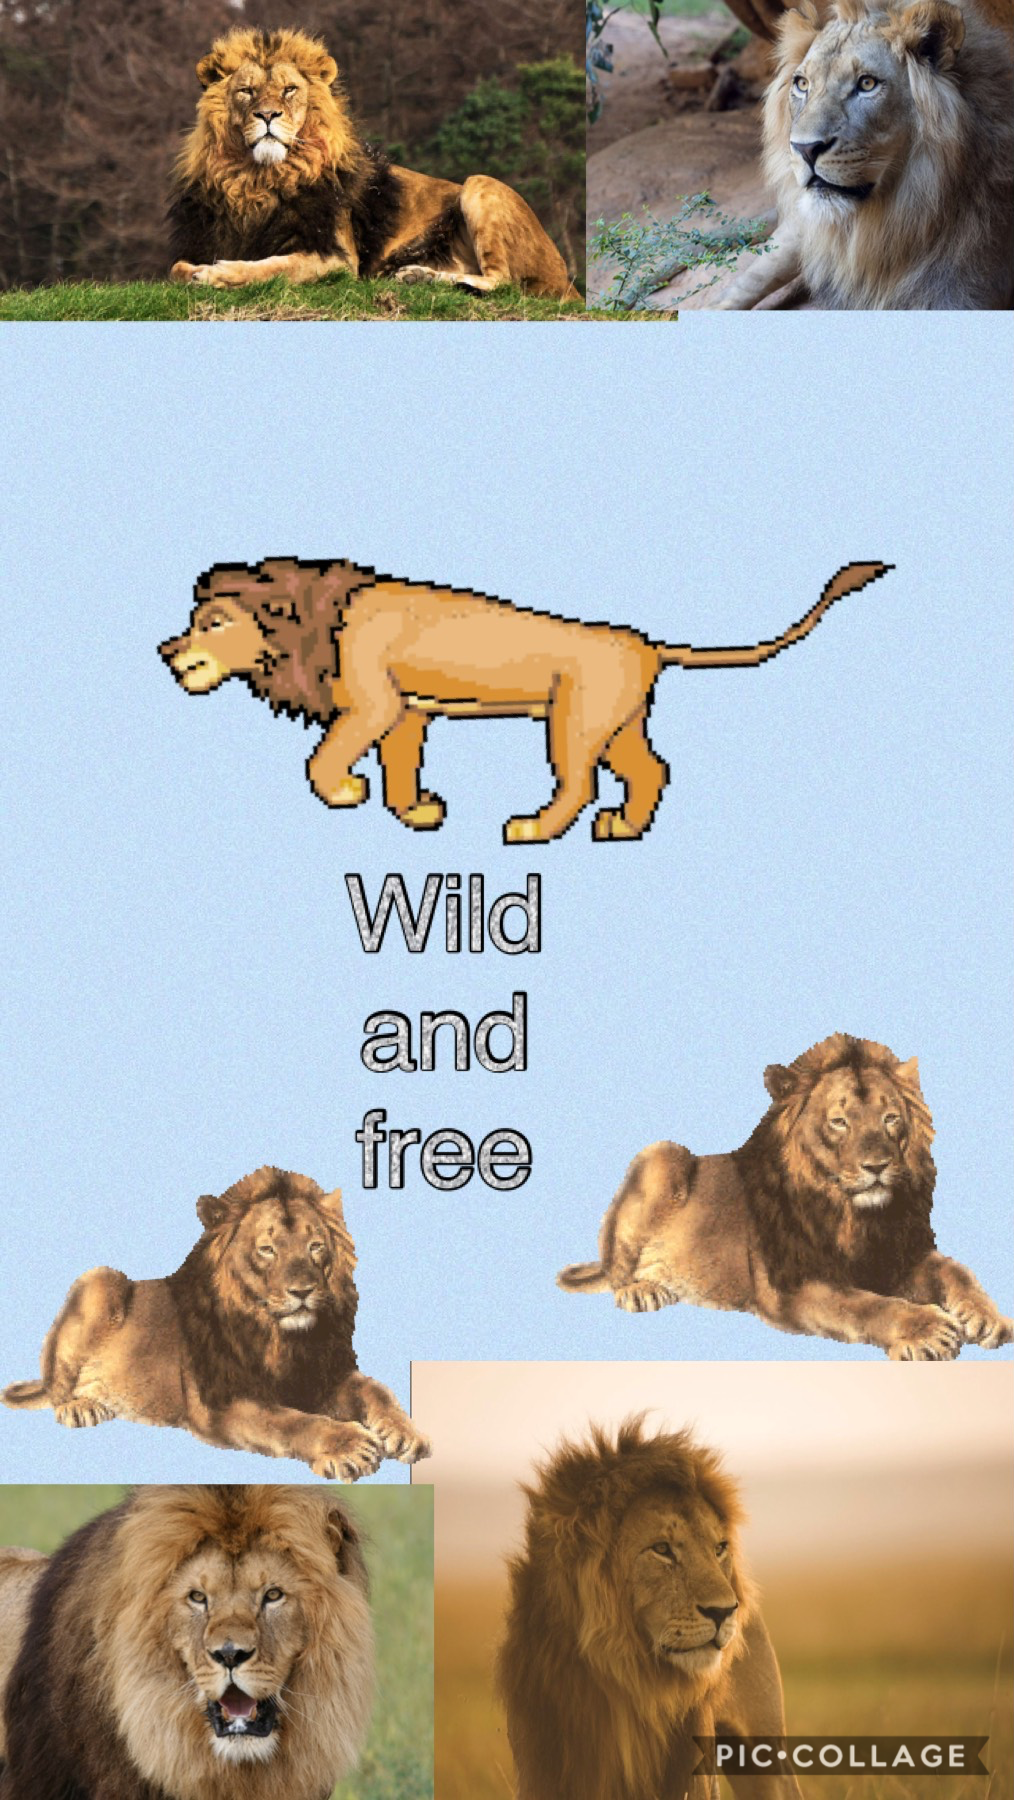 Being Wild and free matters